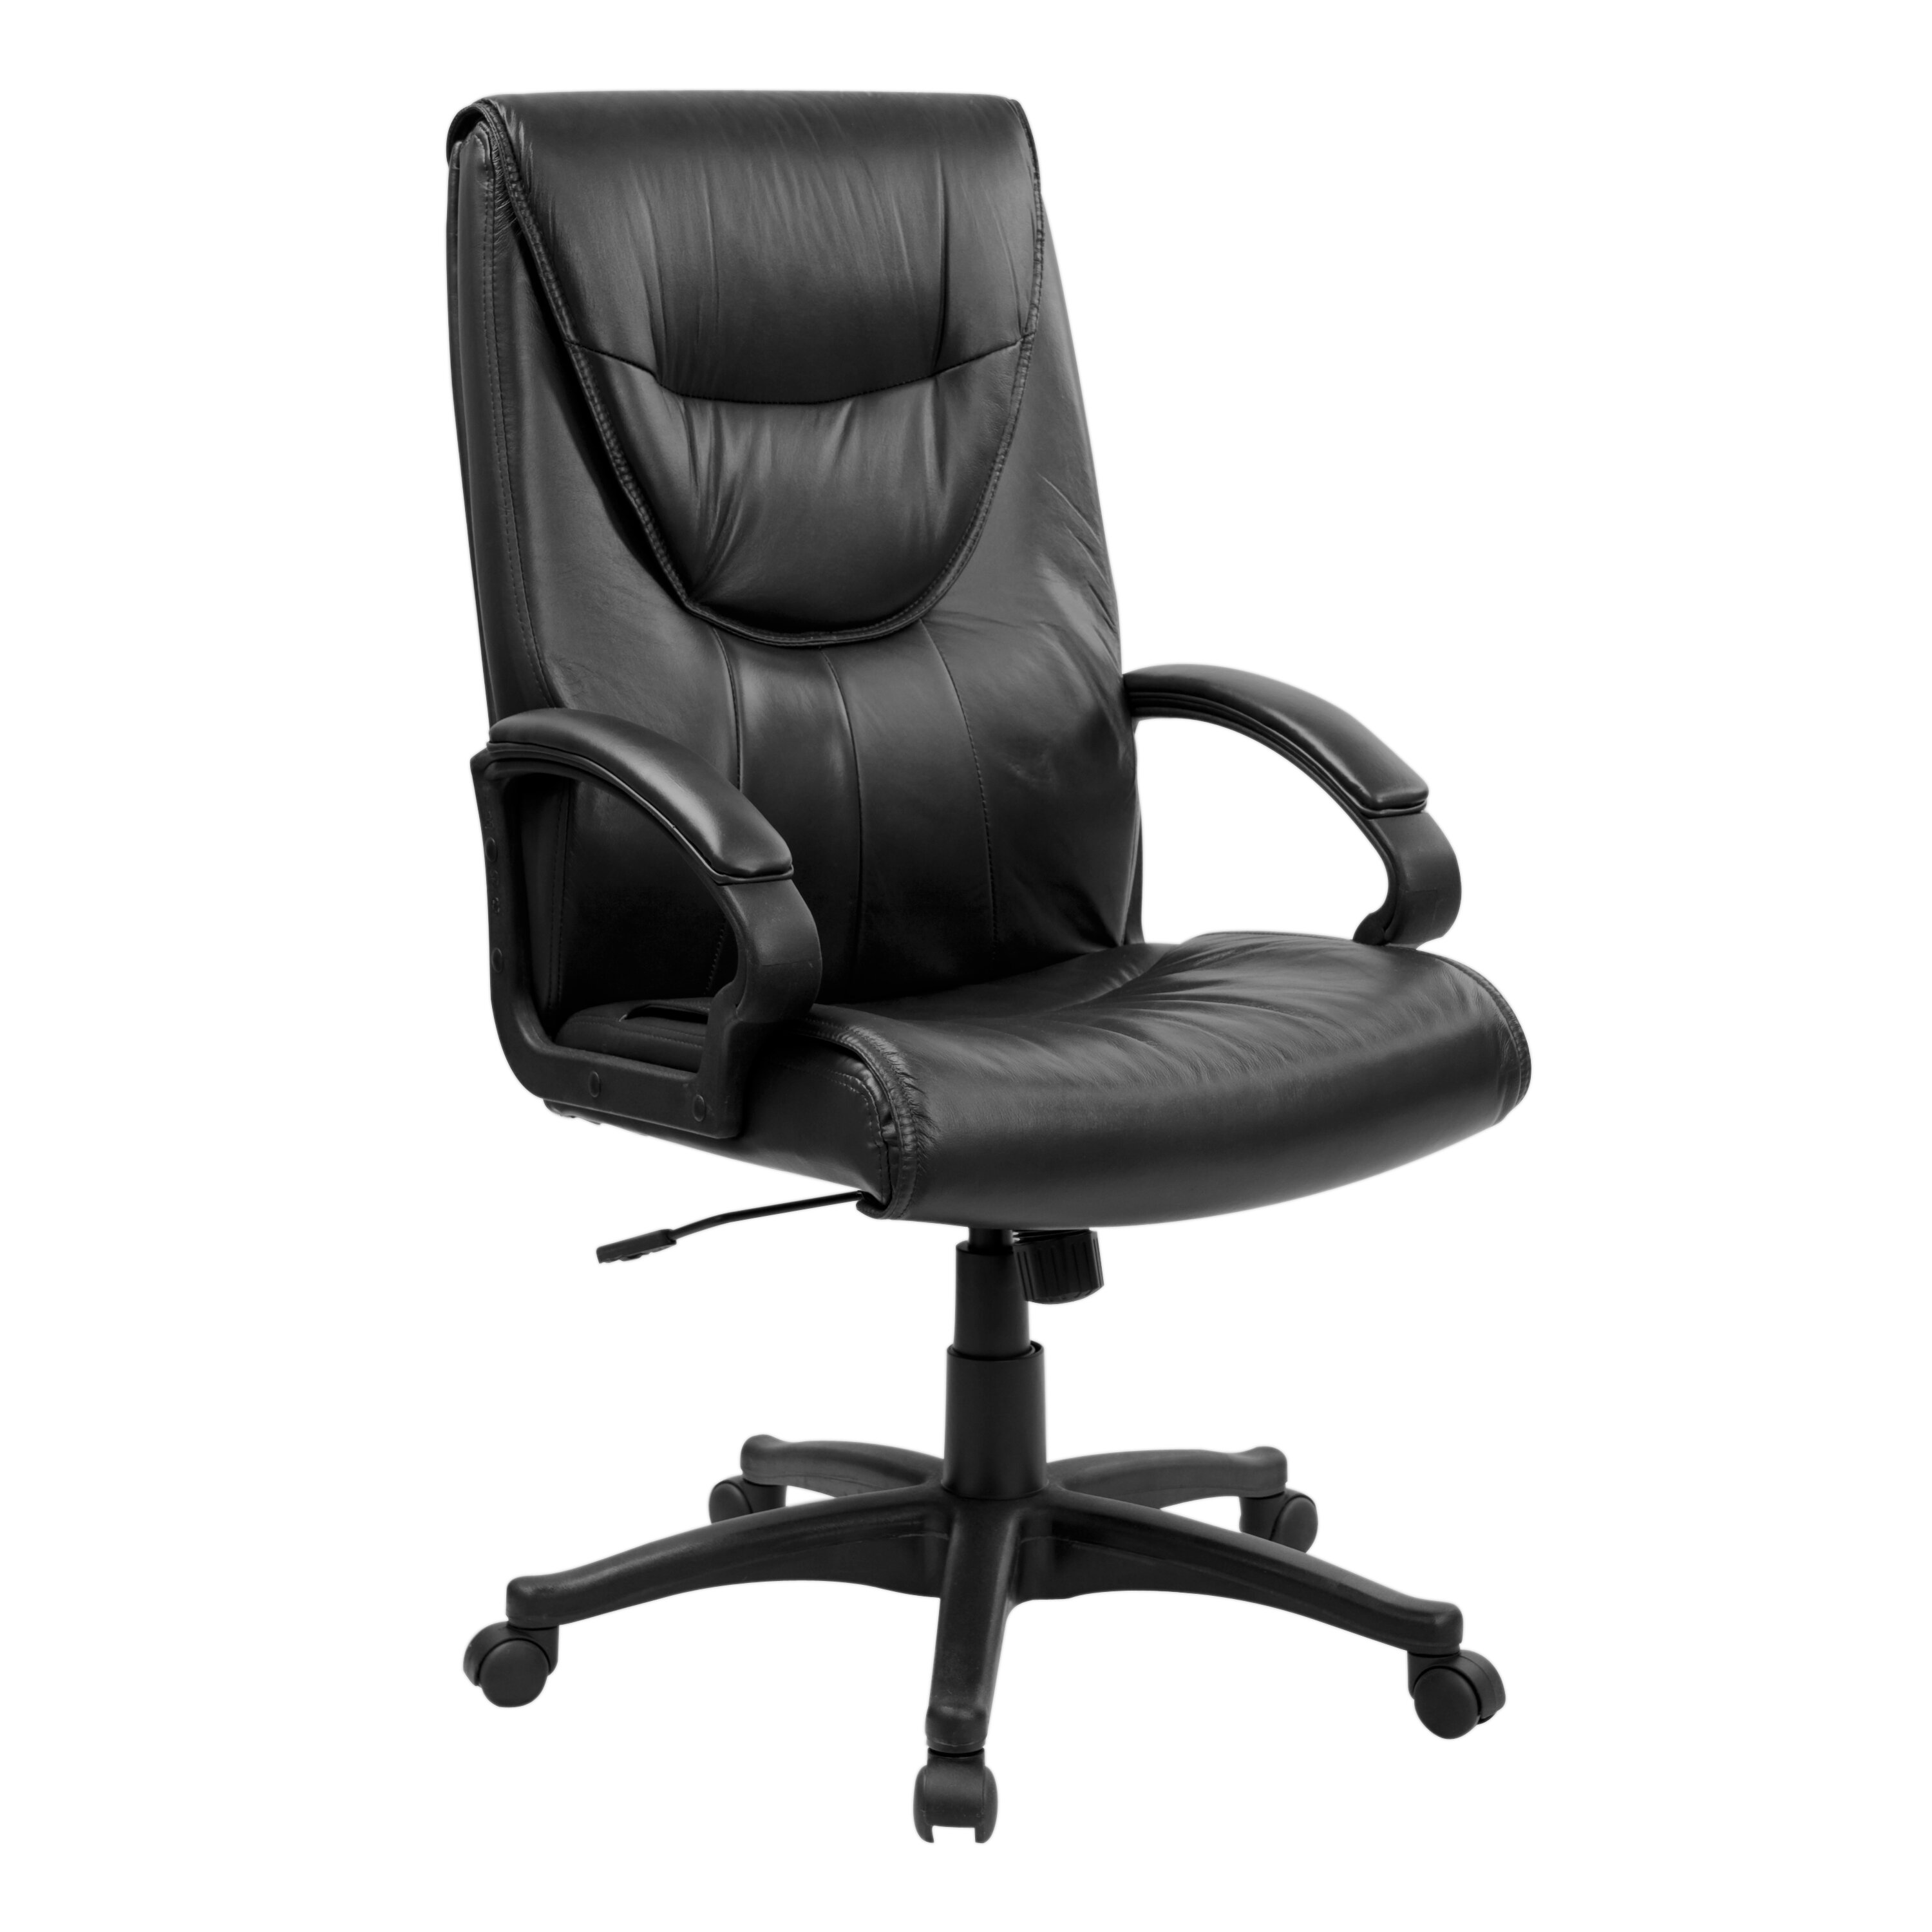 High Back Leather Executive Swivel Chair by Flash Furniture